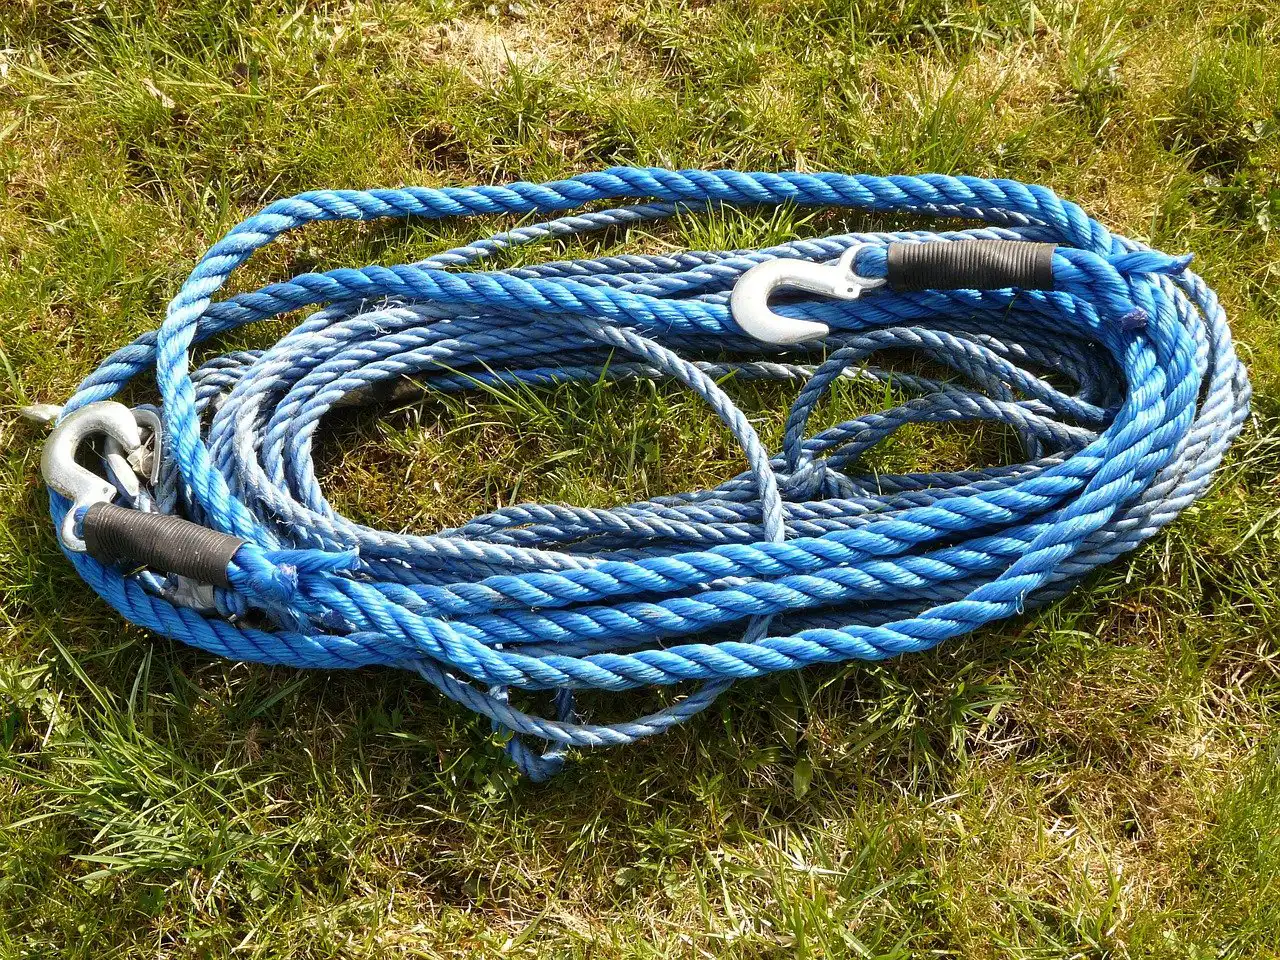 A tow rope - but when can you use it on cars that are not taxed, insured, or with a current MOT?